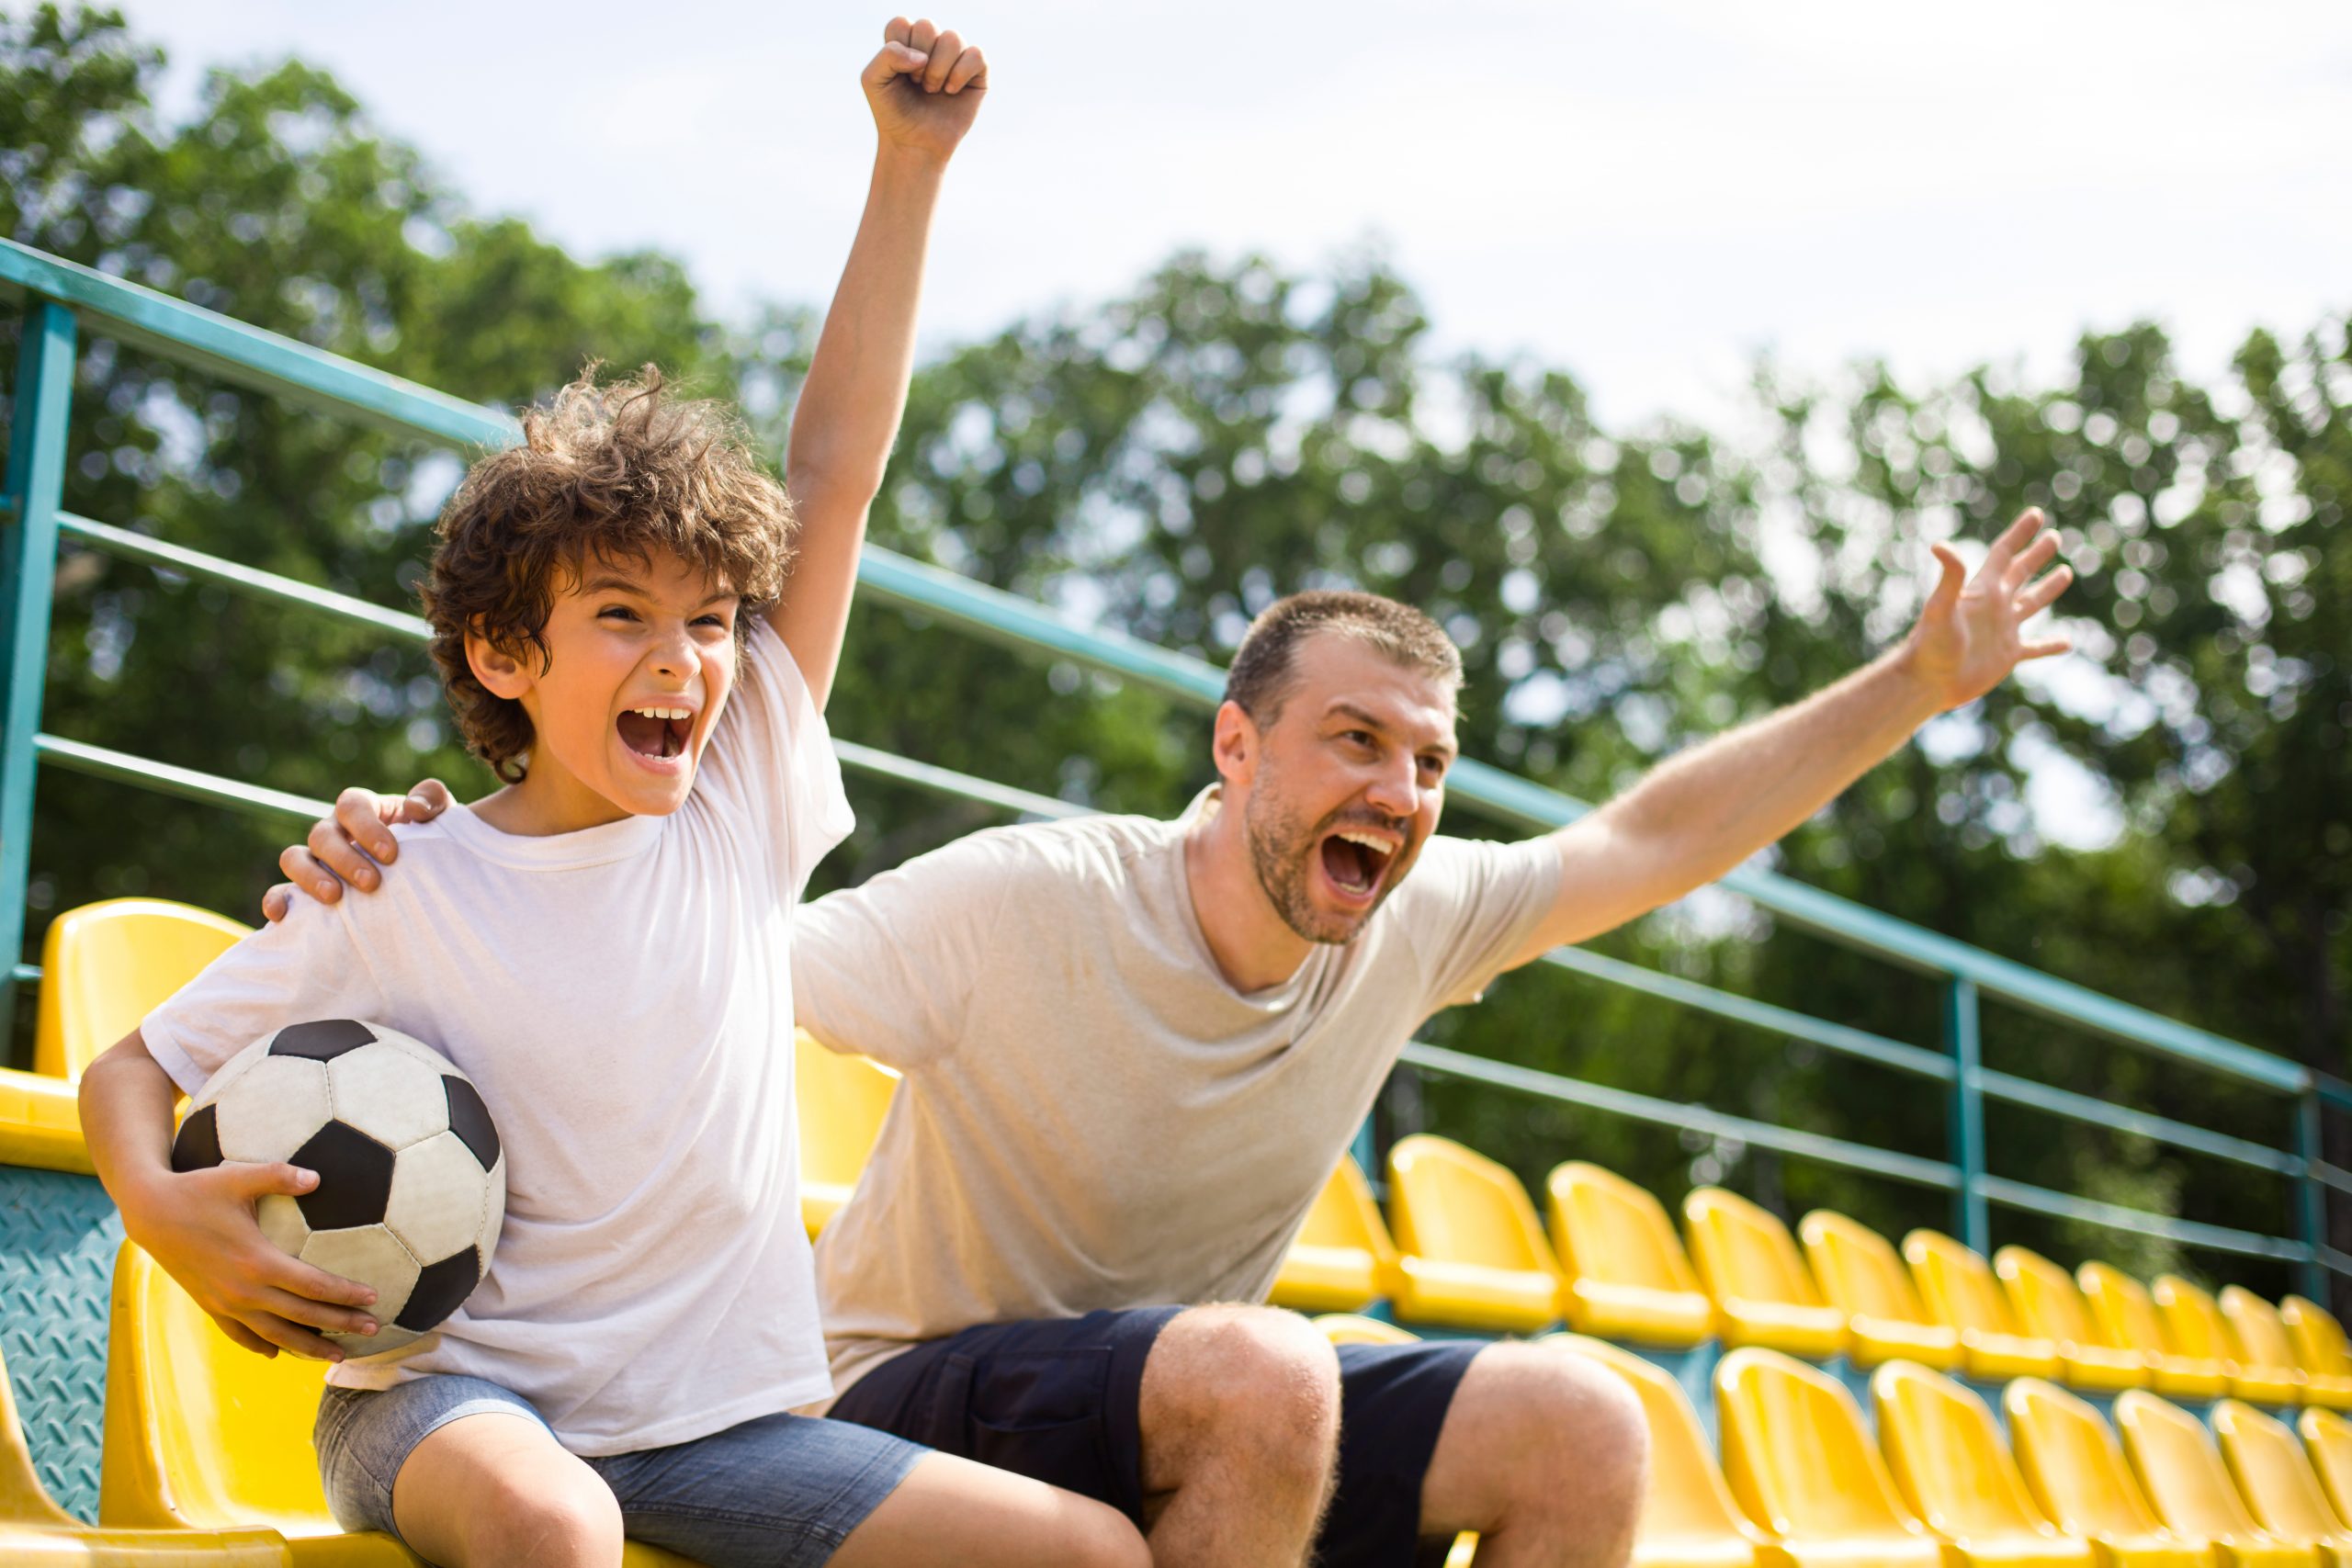 Father and son cheering at soccer game ©Prostock-studio